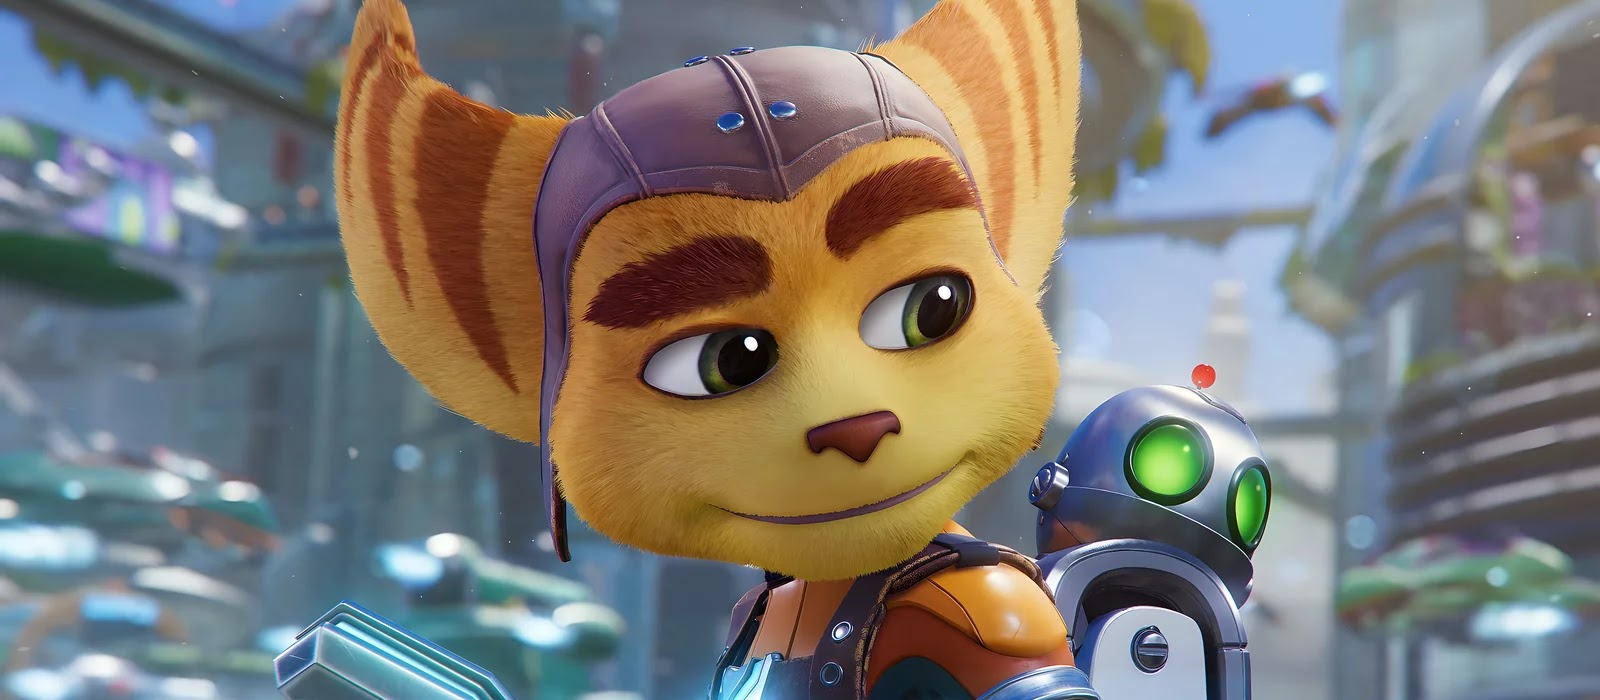 Ratchet & Clank: Rift Apart crashes on PC? Doesn't start? Hangs when exiting the game? - problem solving